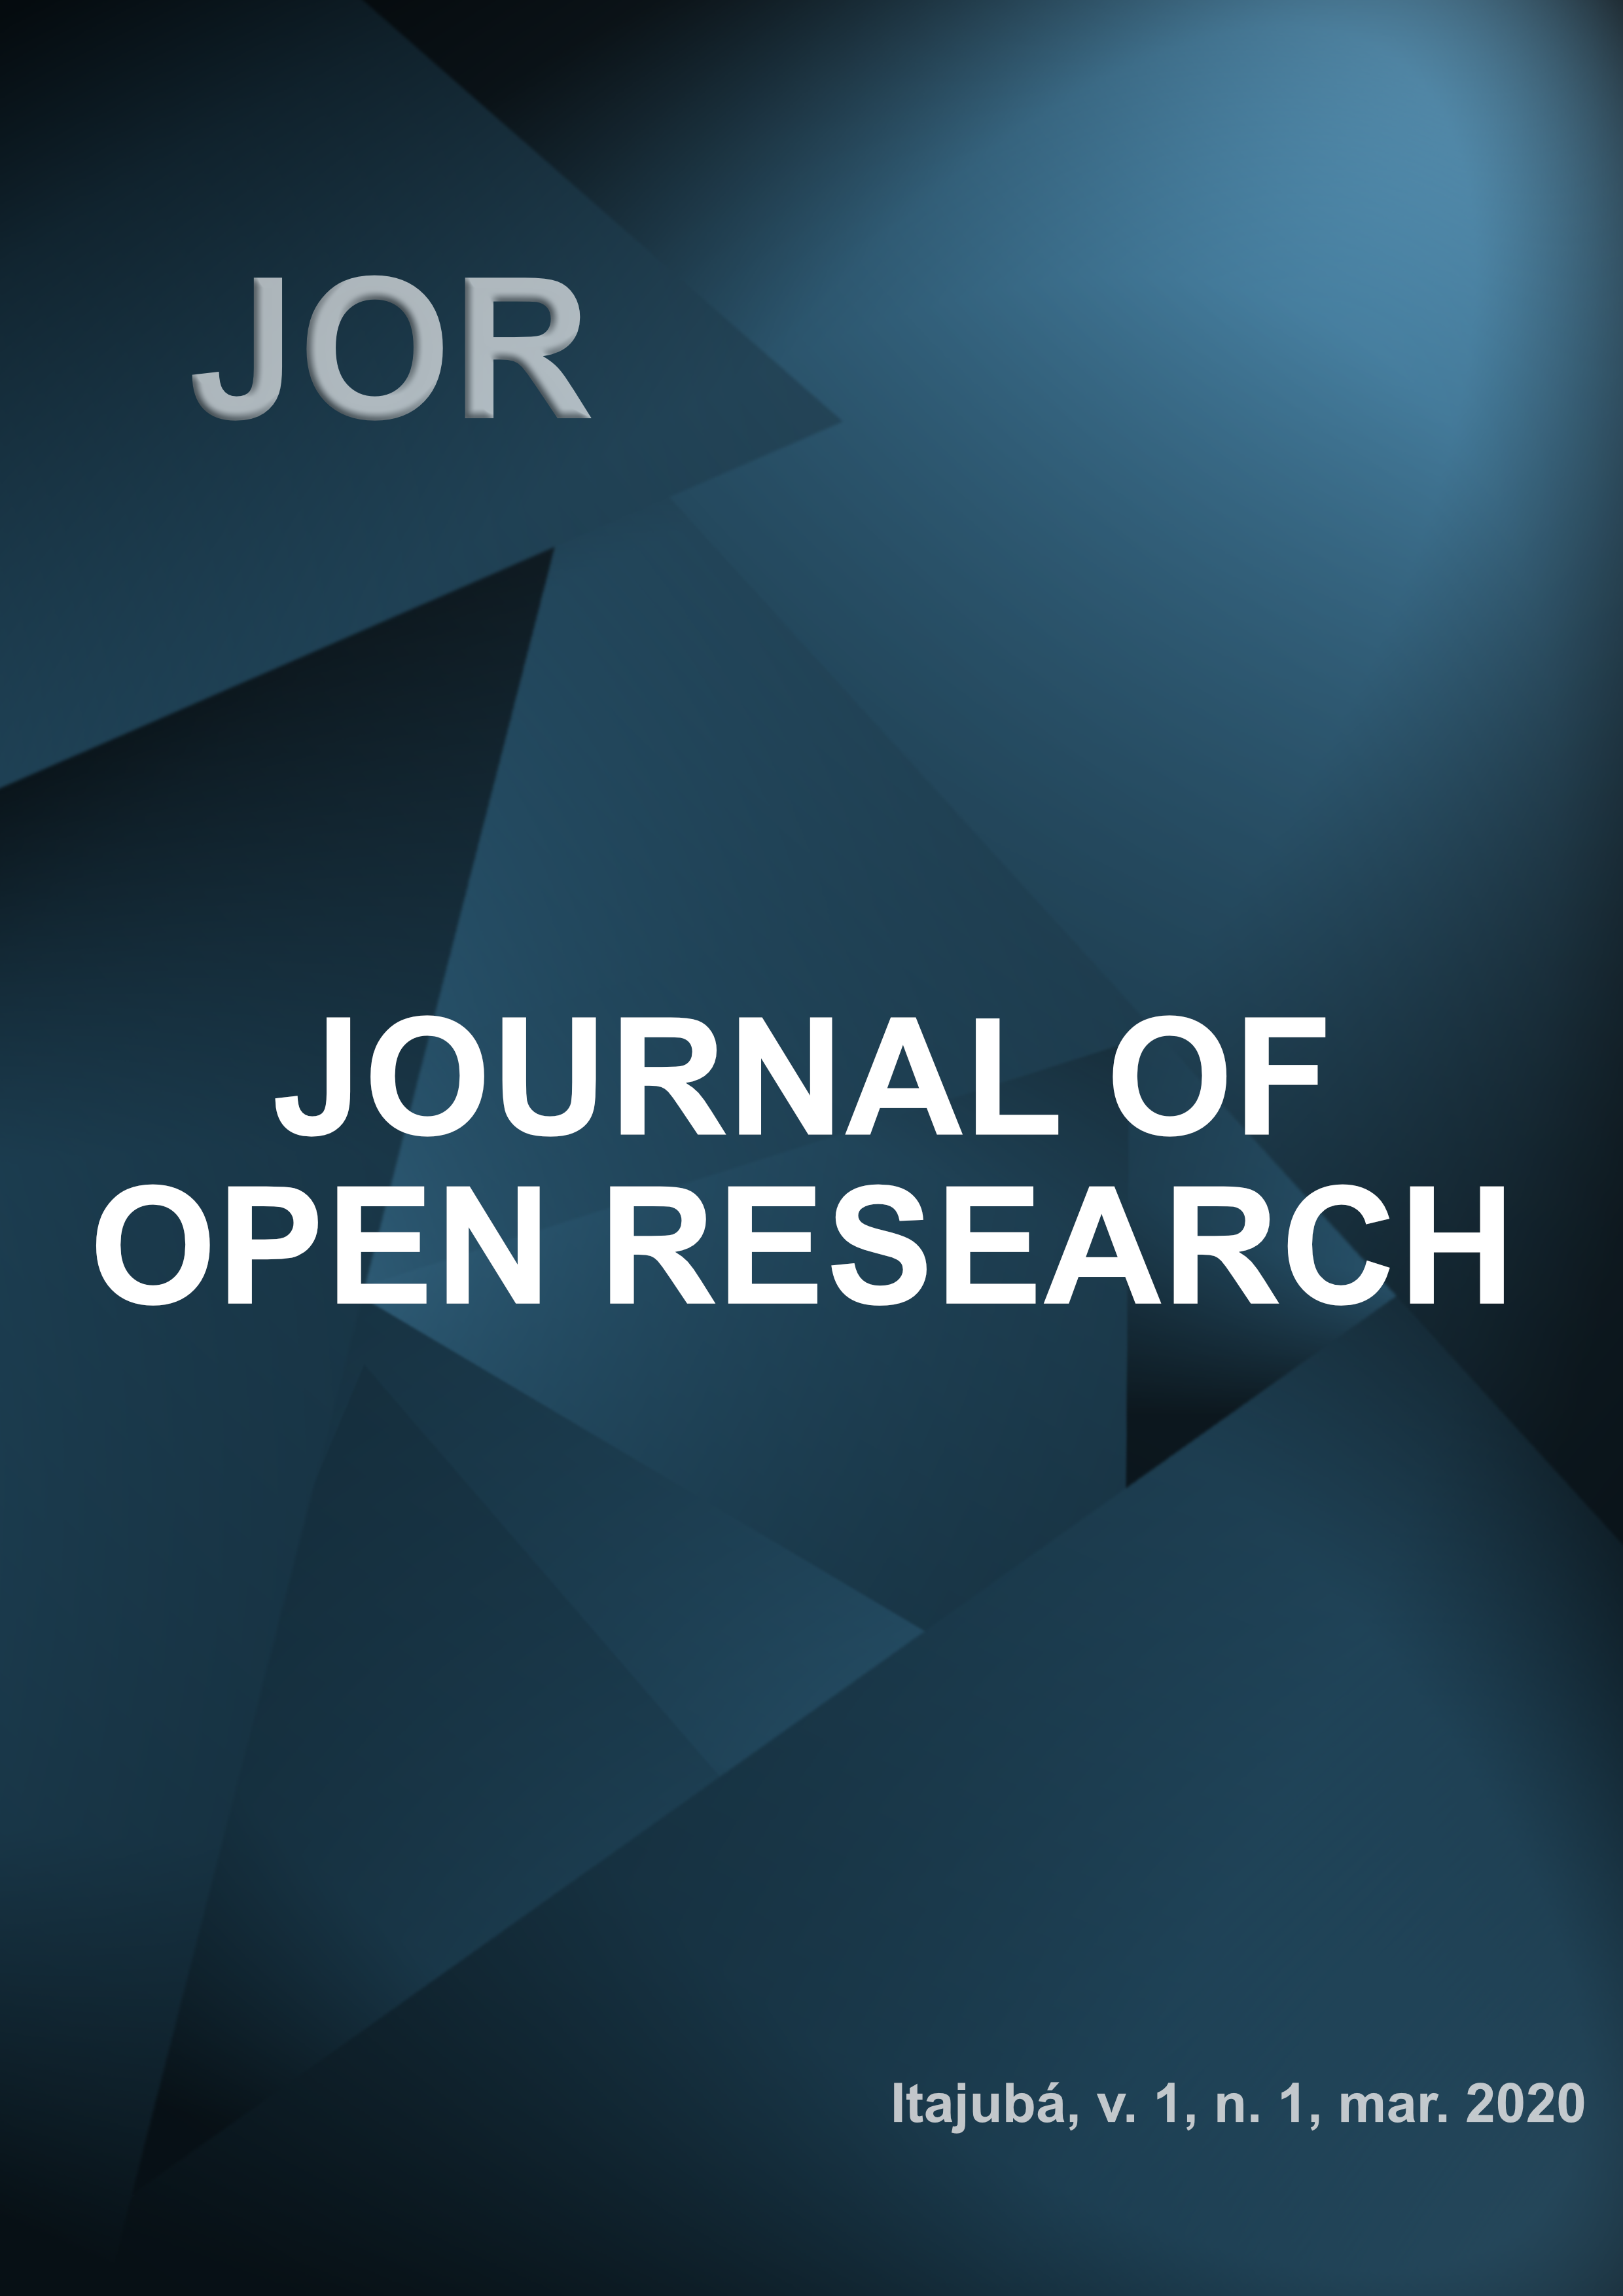 					Visualizar v. 1 n. 1 (2020): JOURNAL OF OPEN RESEARCH
				